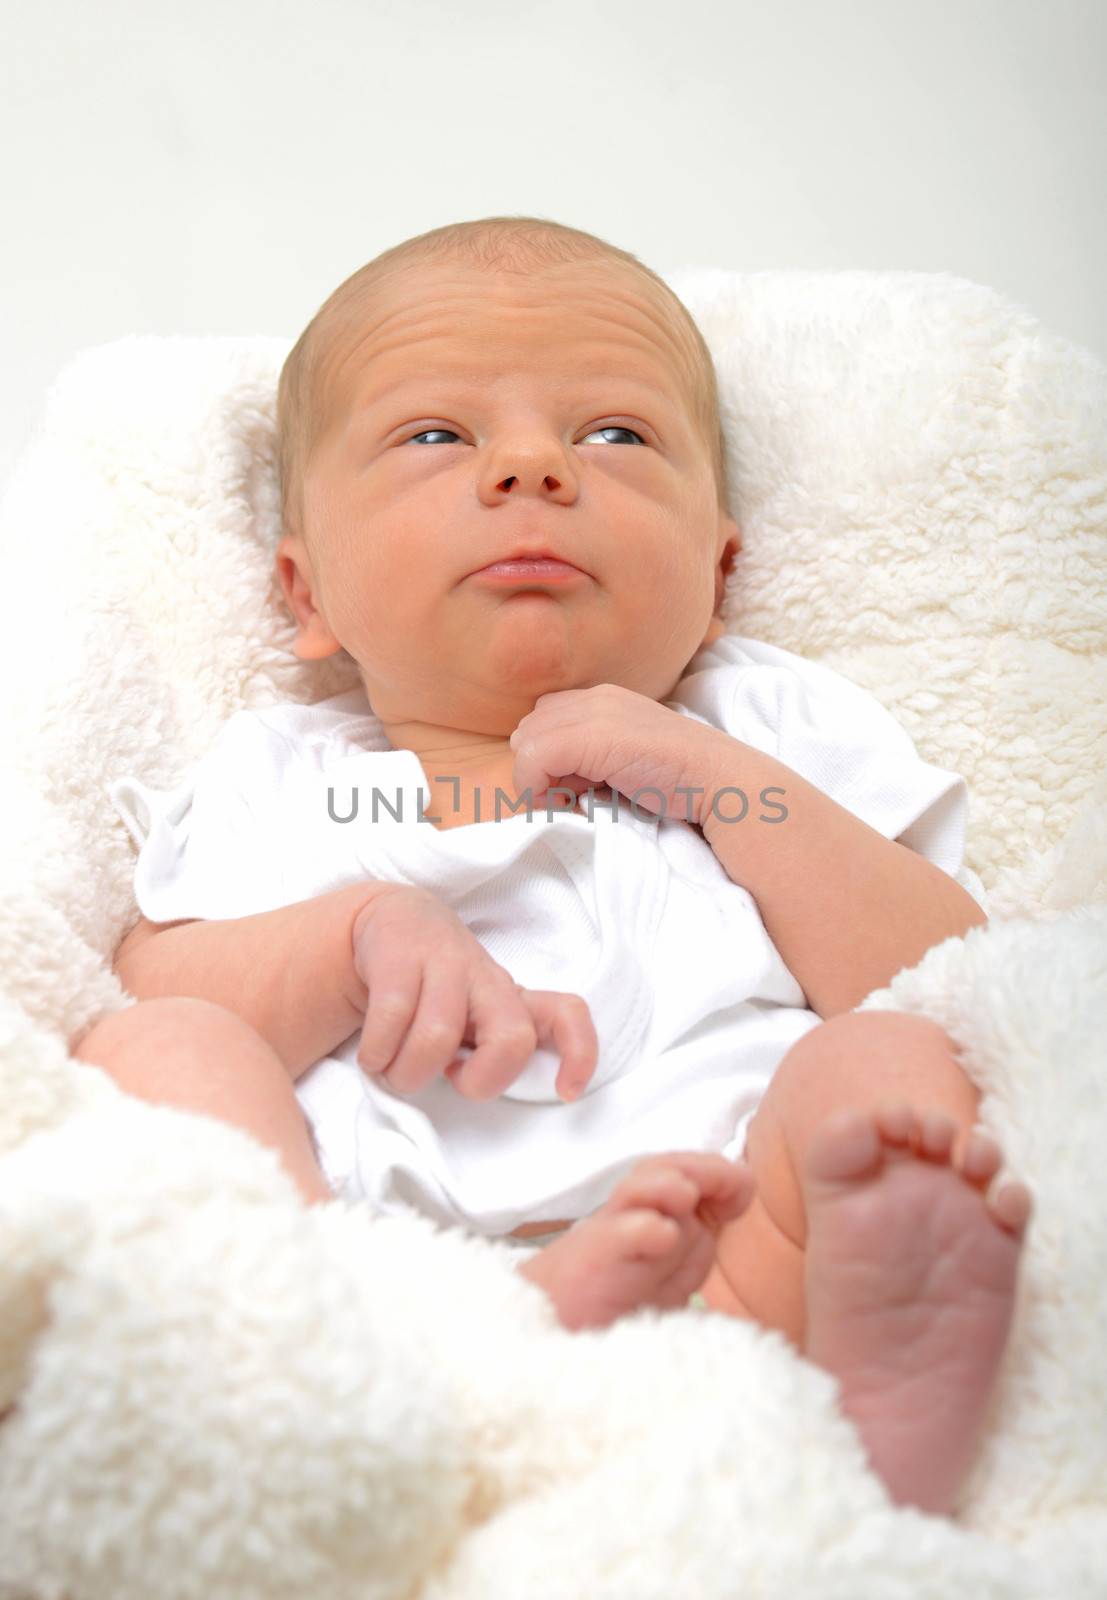 confused newborn infant by ftlaudgirl